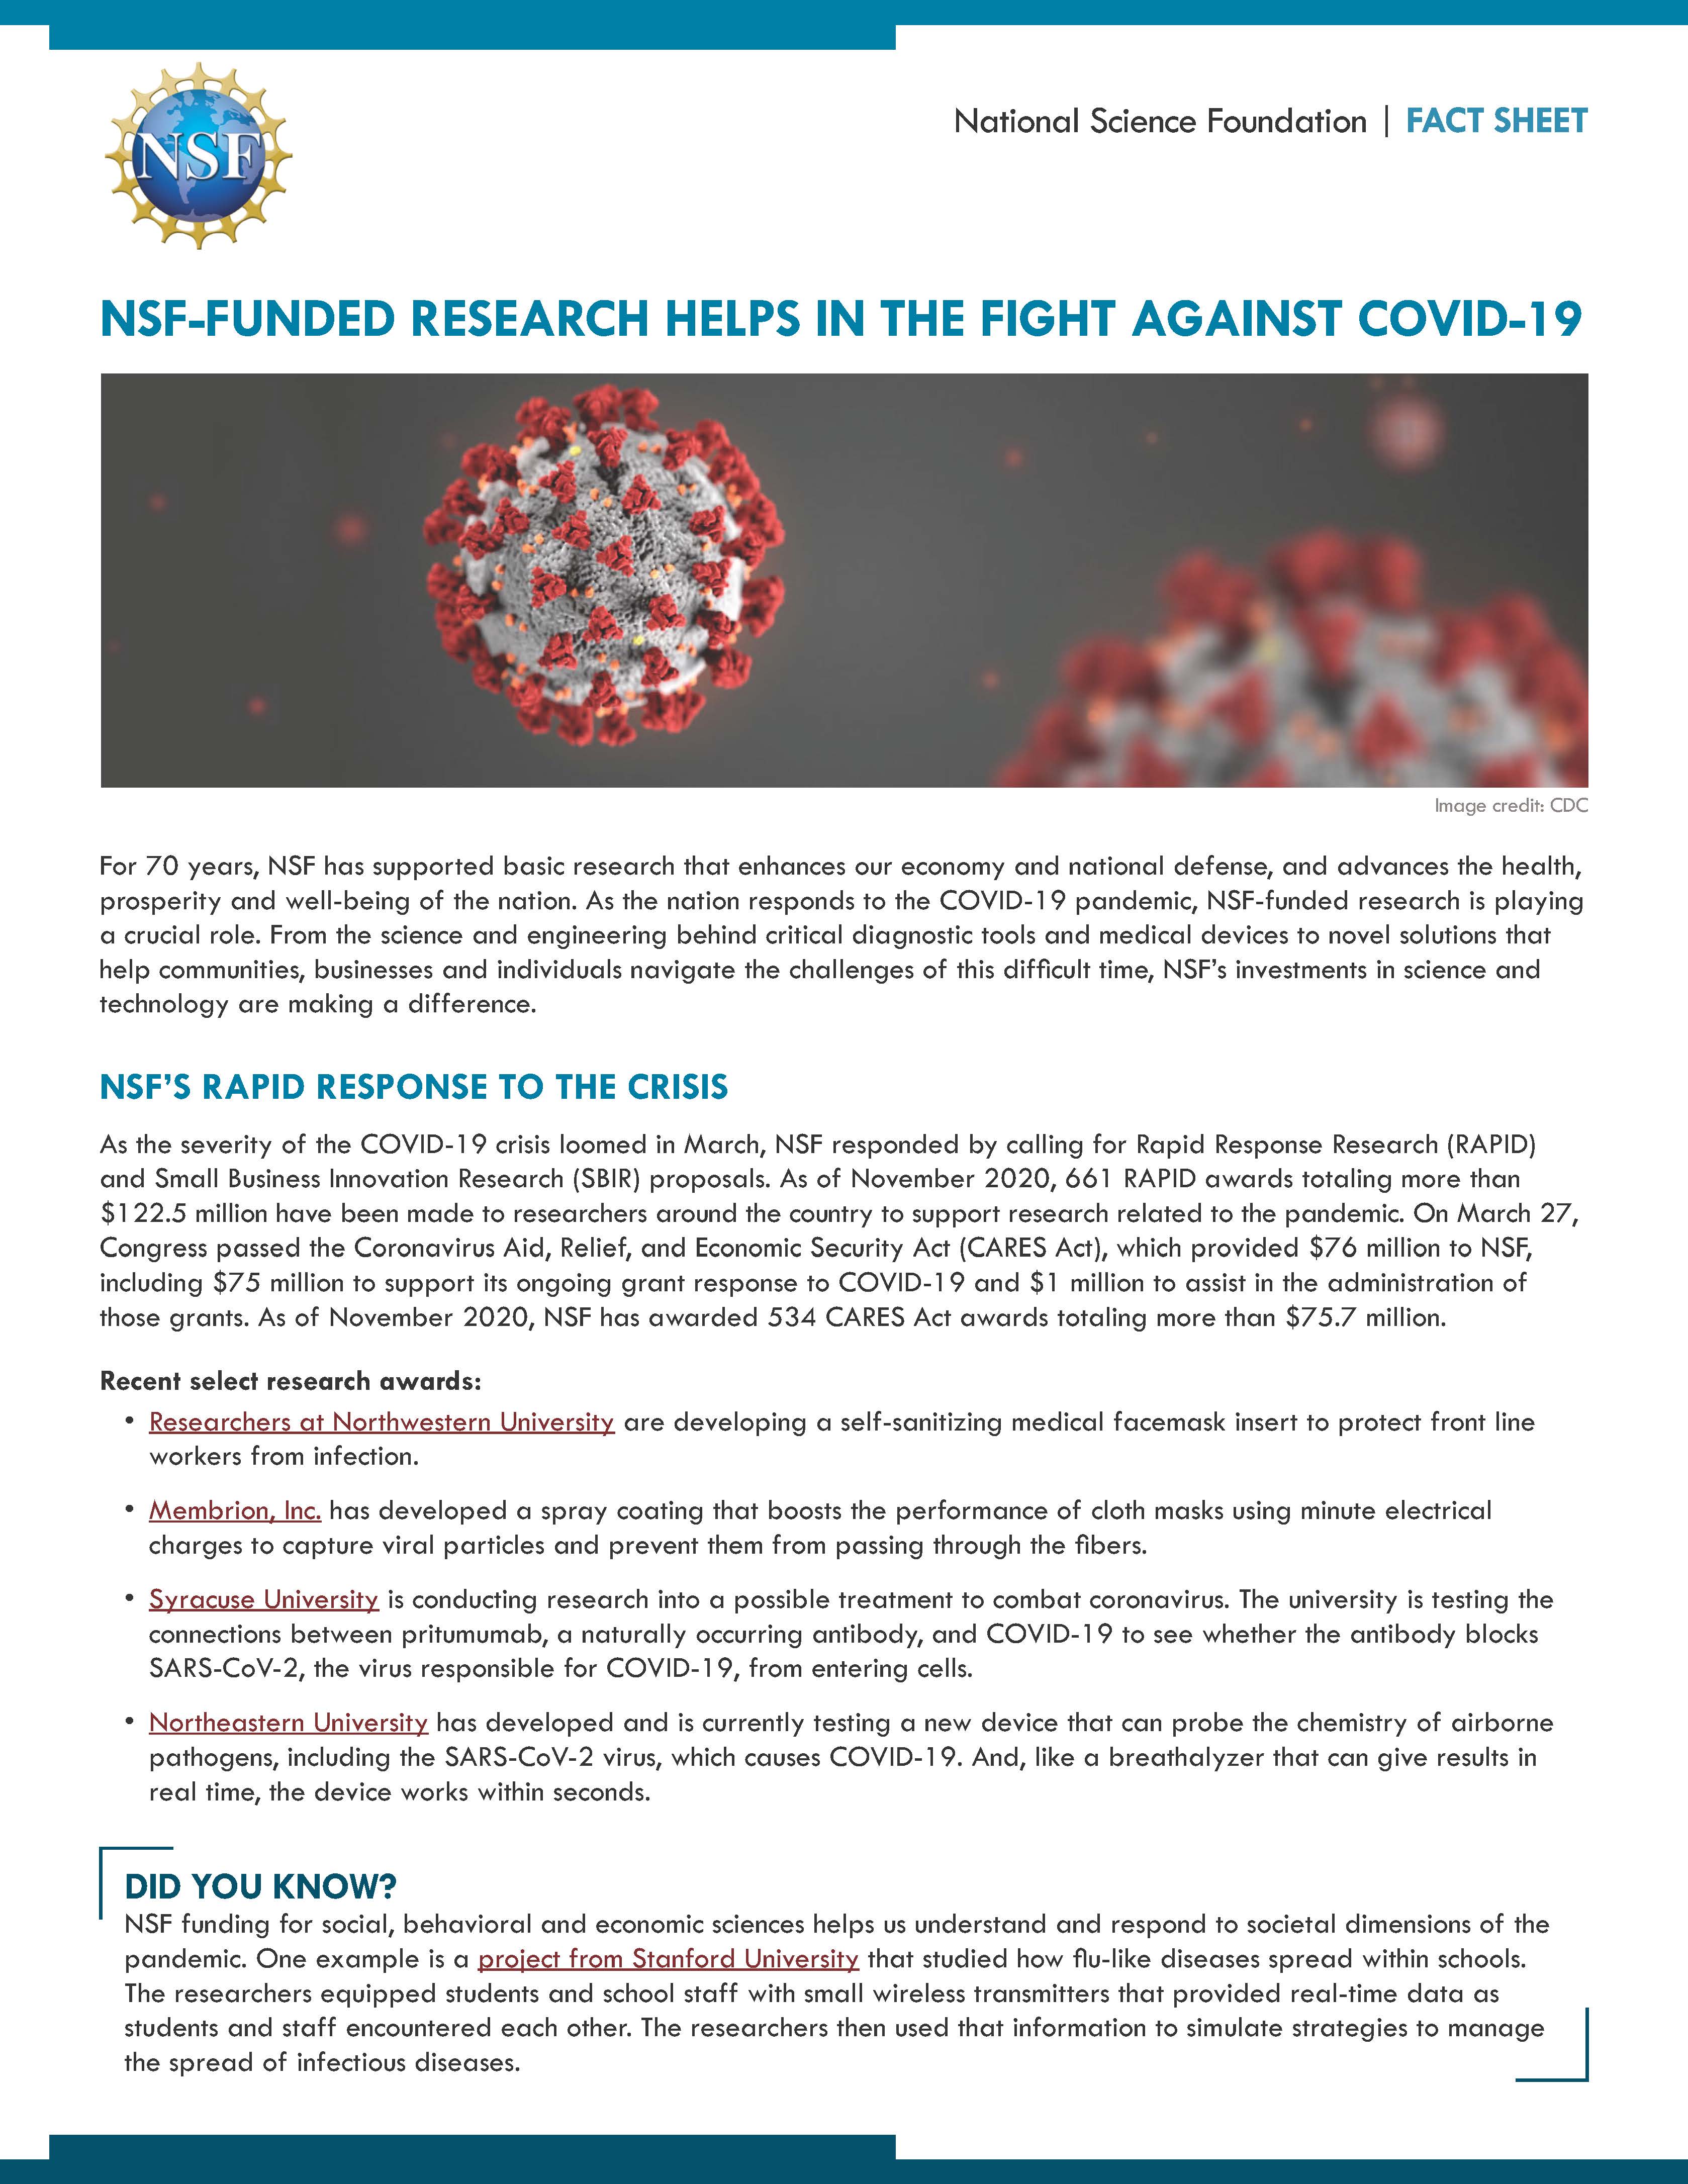 NSF-Funded Research Helps in the Fight Against COVID-19 cover page